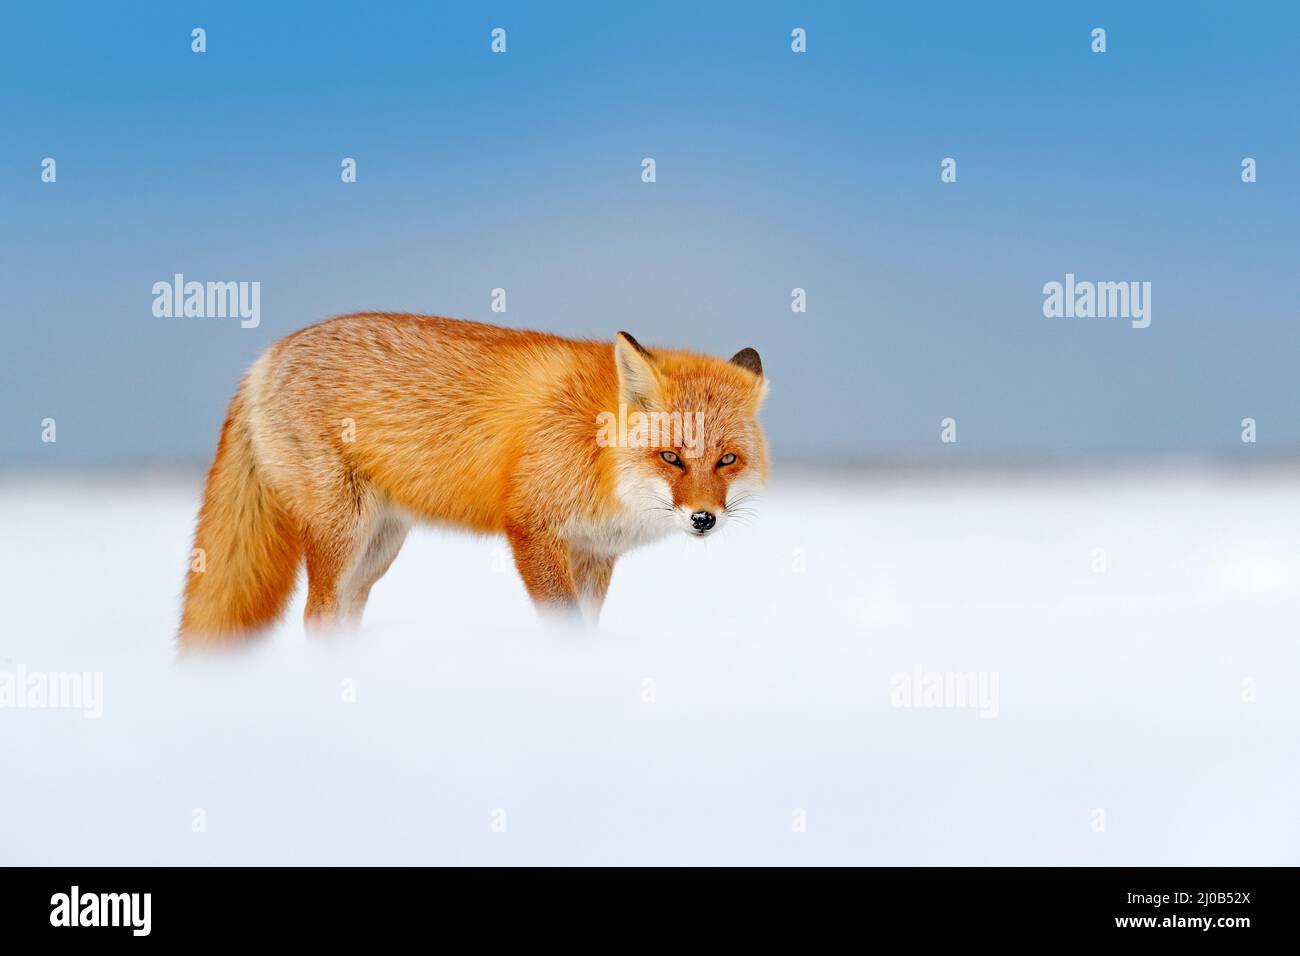 Winter nature. Red fox in white snow. Cold winter with orange fur fox. Hunting animal in the snowy meadow, Japan. Beautiful orange coat animal nature. Stock Photo